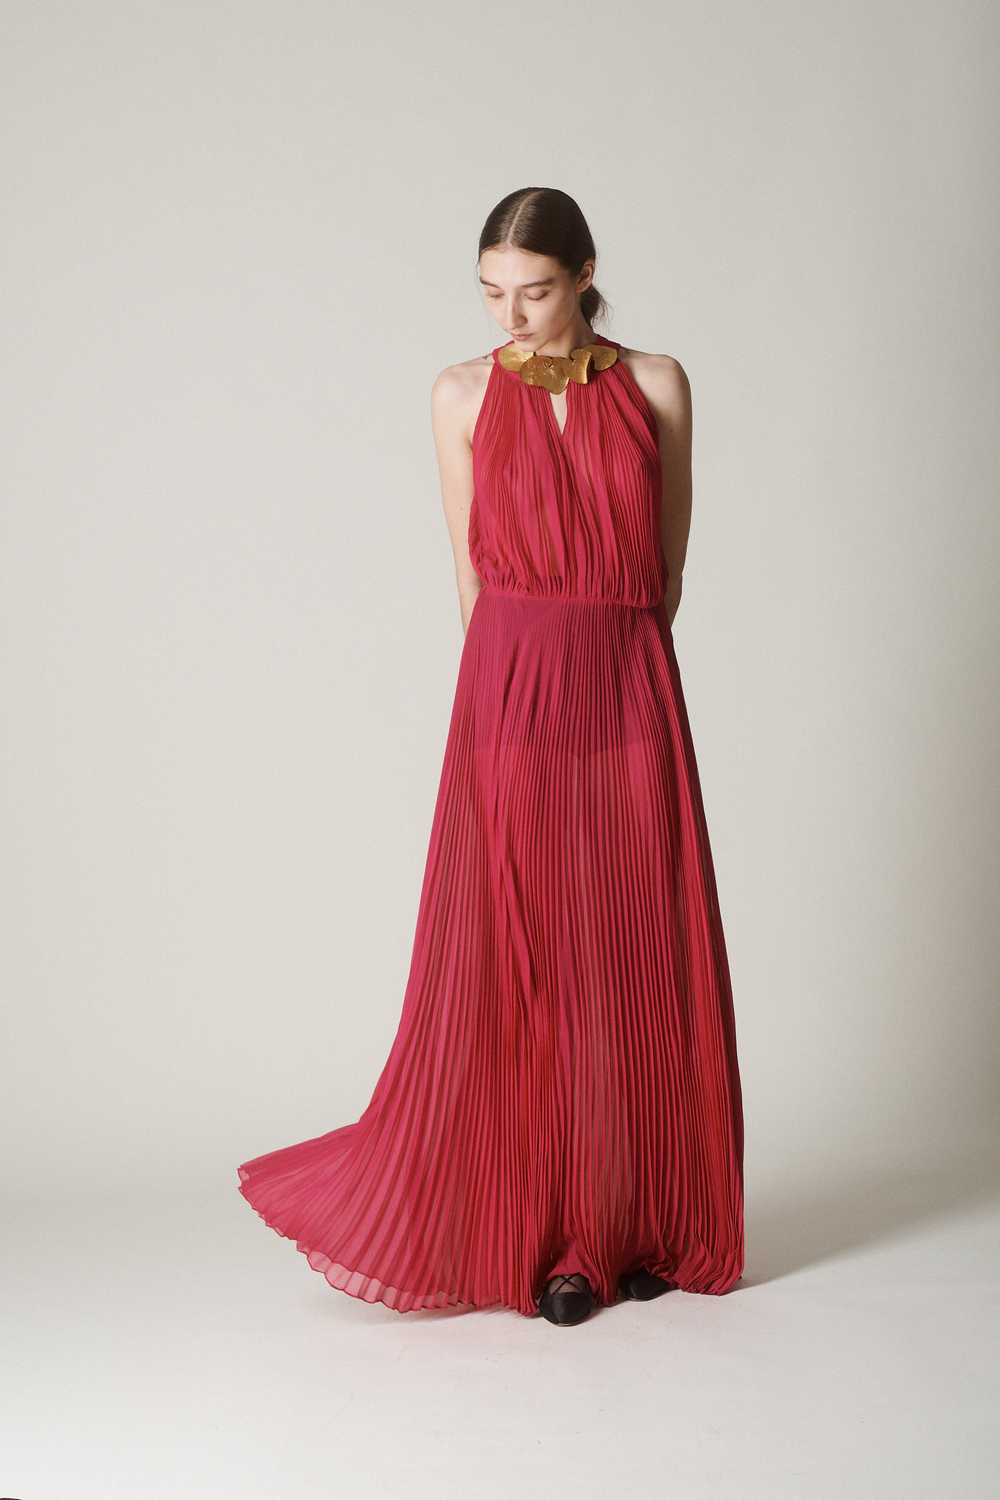 Vintage Pleated Chiffon Gown - image 3